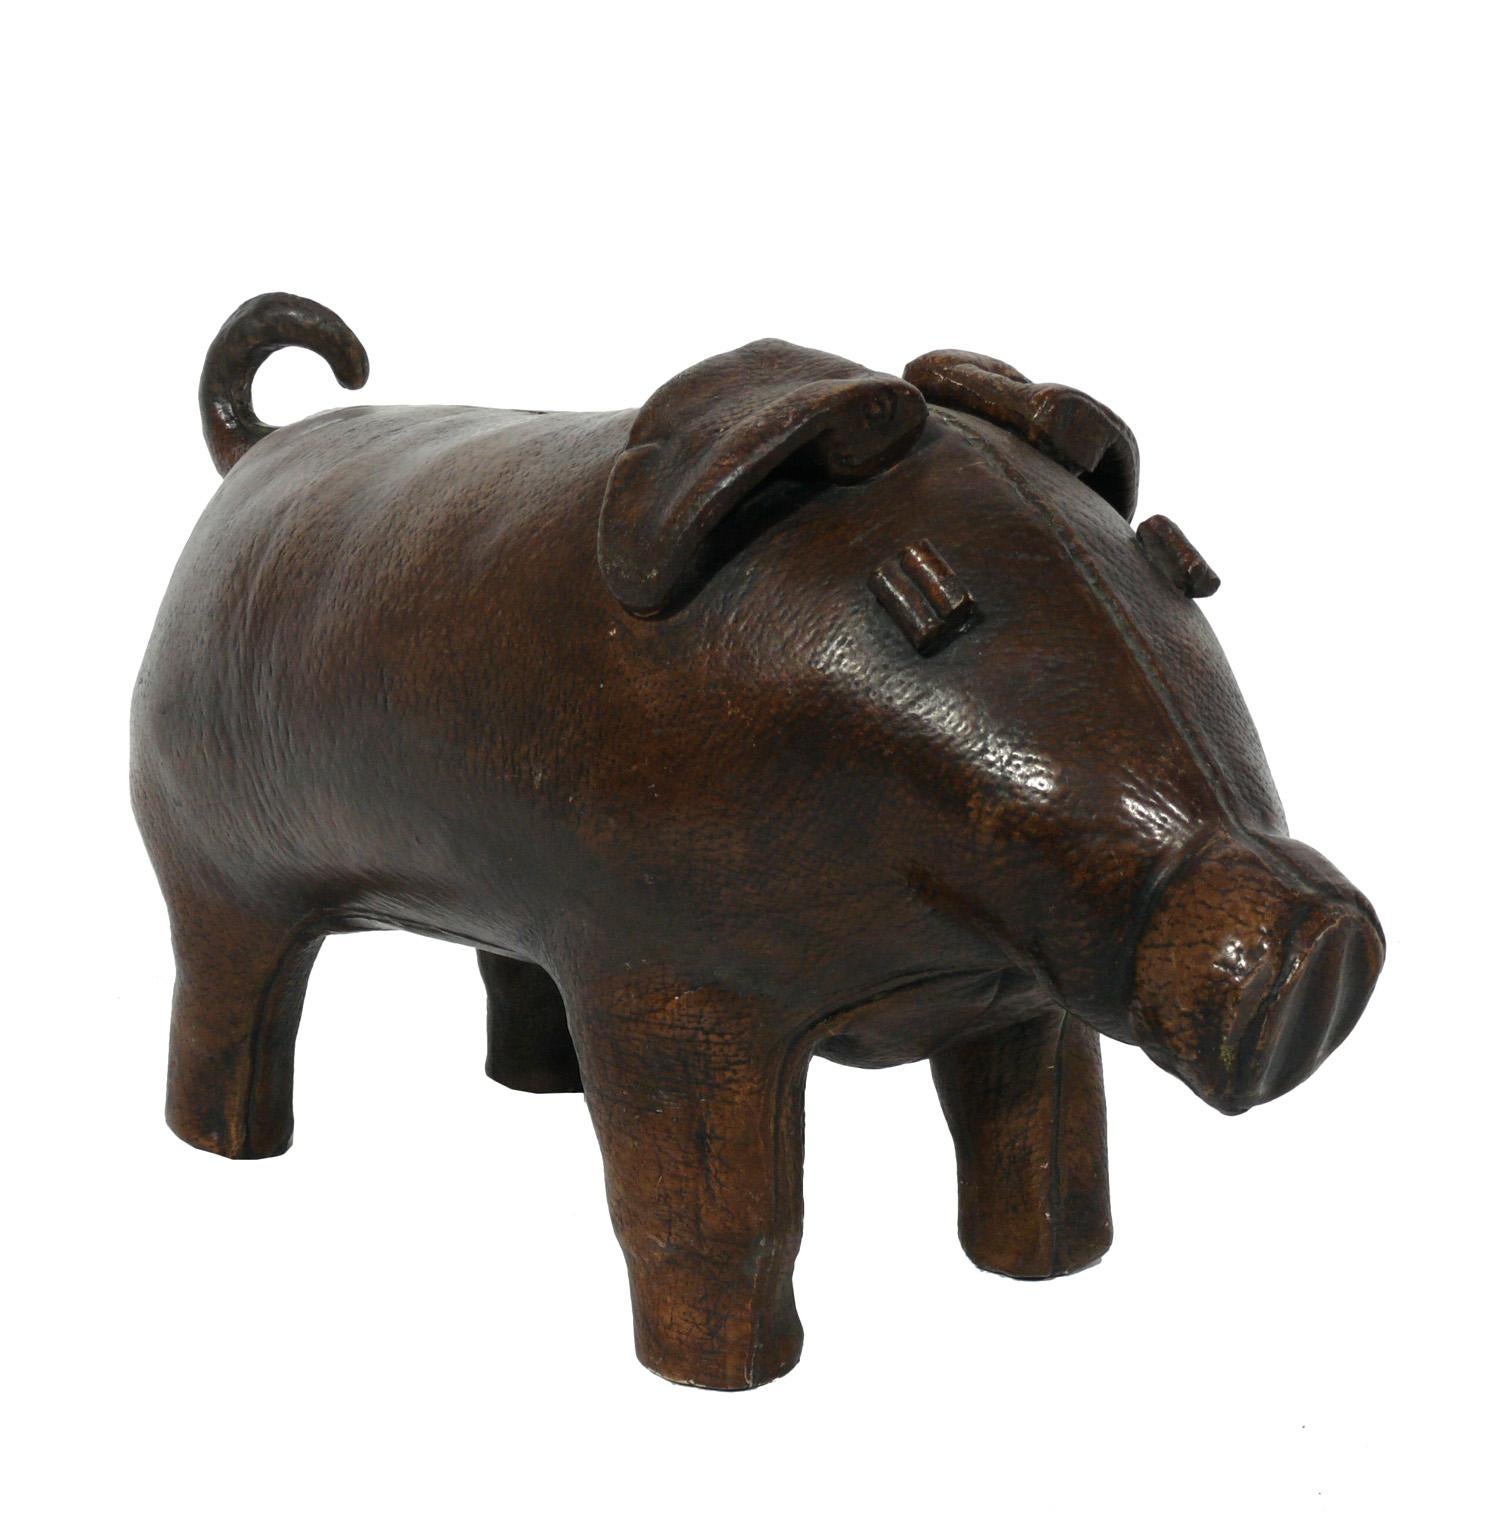 Abercrombie & Fitch ceramic piggy bank, England, circa 1950s. Modeled after their famous leather animal toys and footstools, this little piggie looks just like stitched leather, but is actually constructed of ceramic.